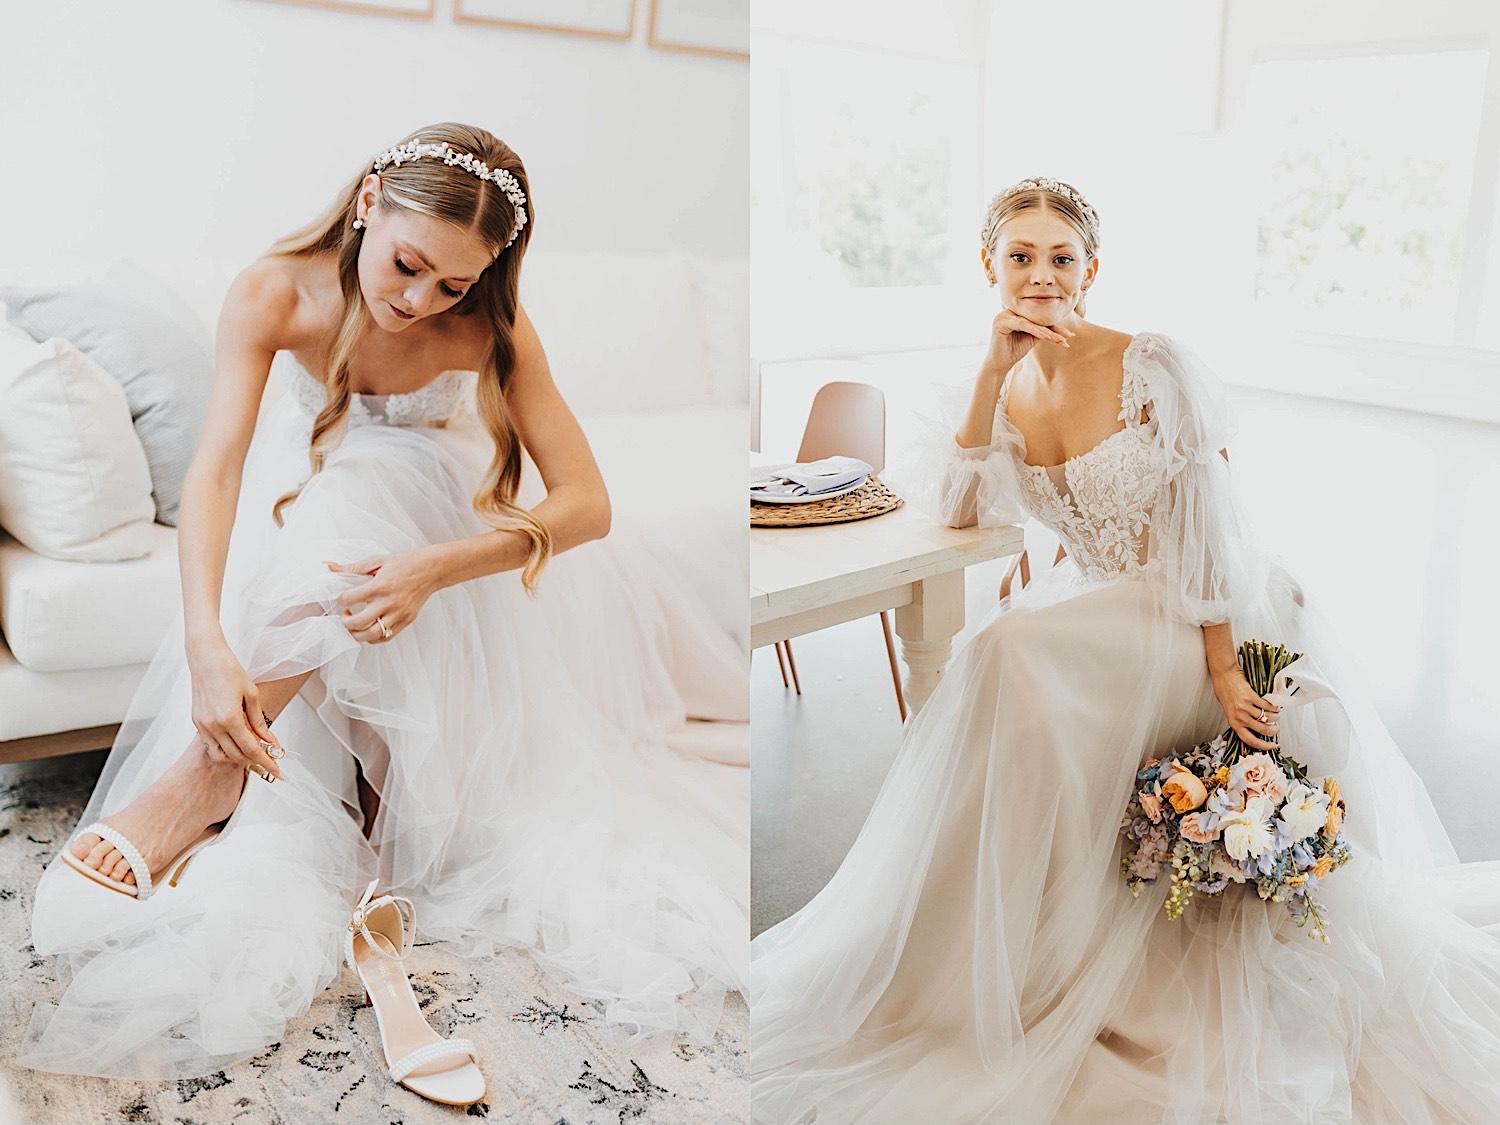 2 photos side by side of a bride, in the left photo she is sitting on a couch adjusting her shoe, in the right photo she is sitting at a table and smiling at the camera